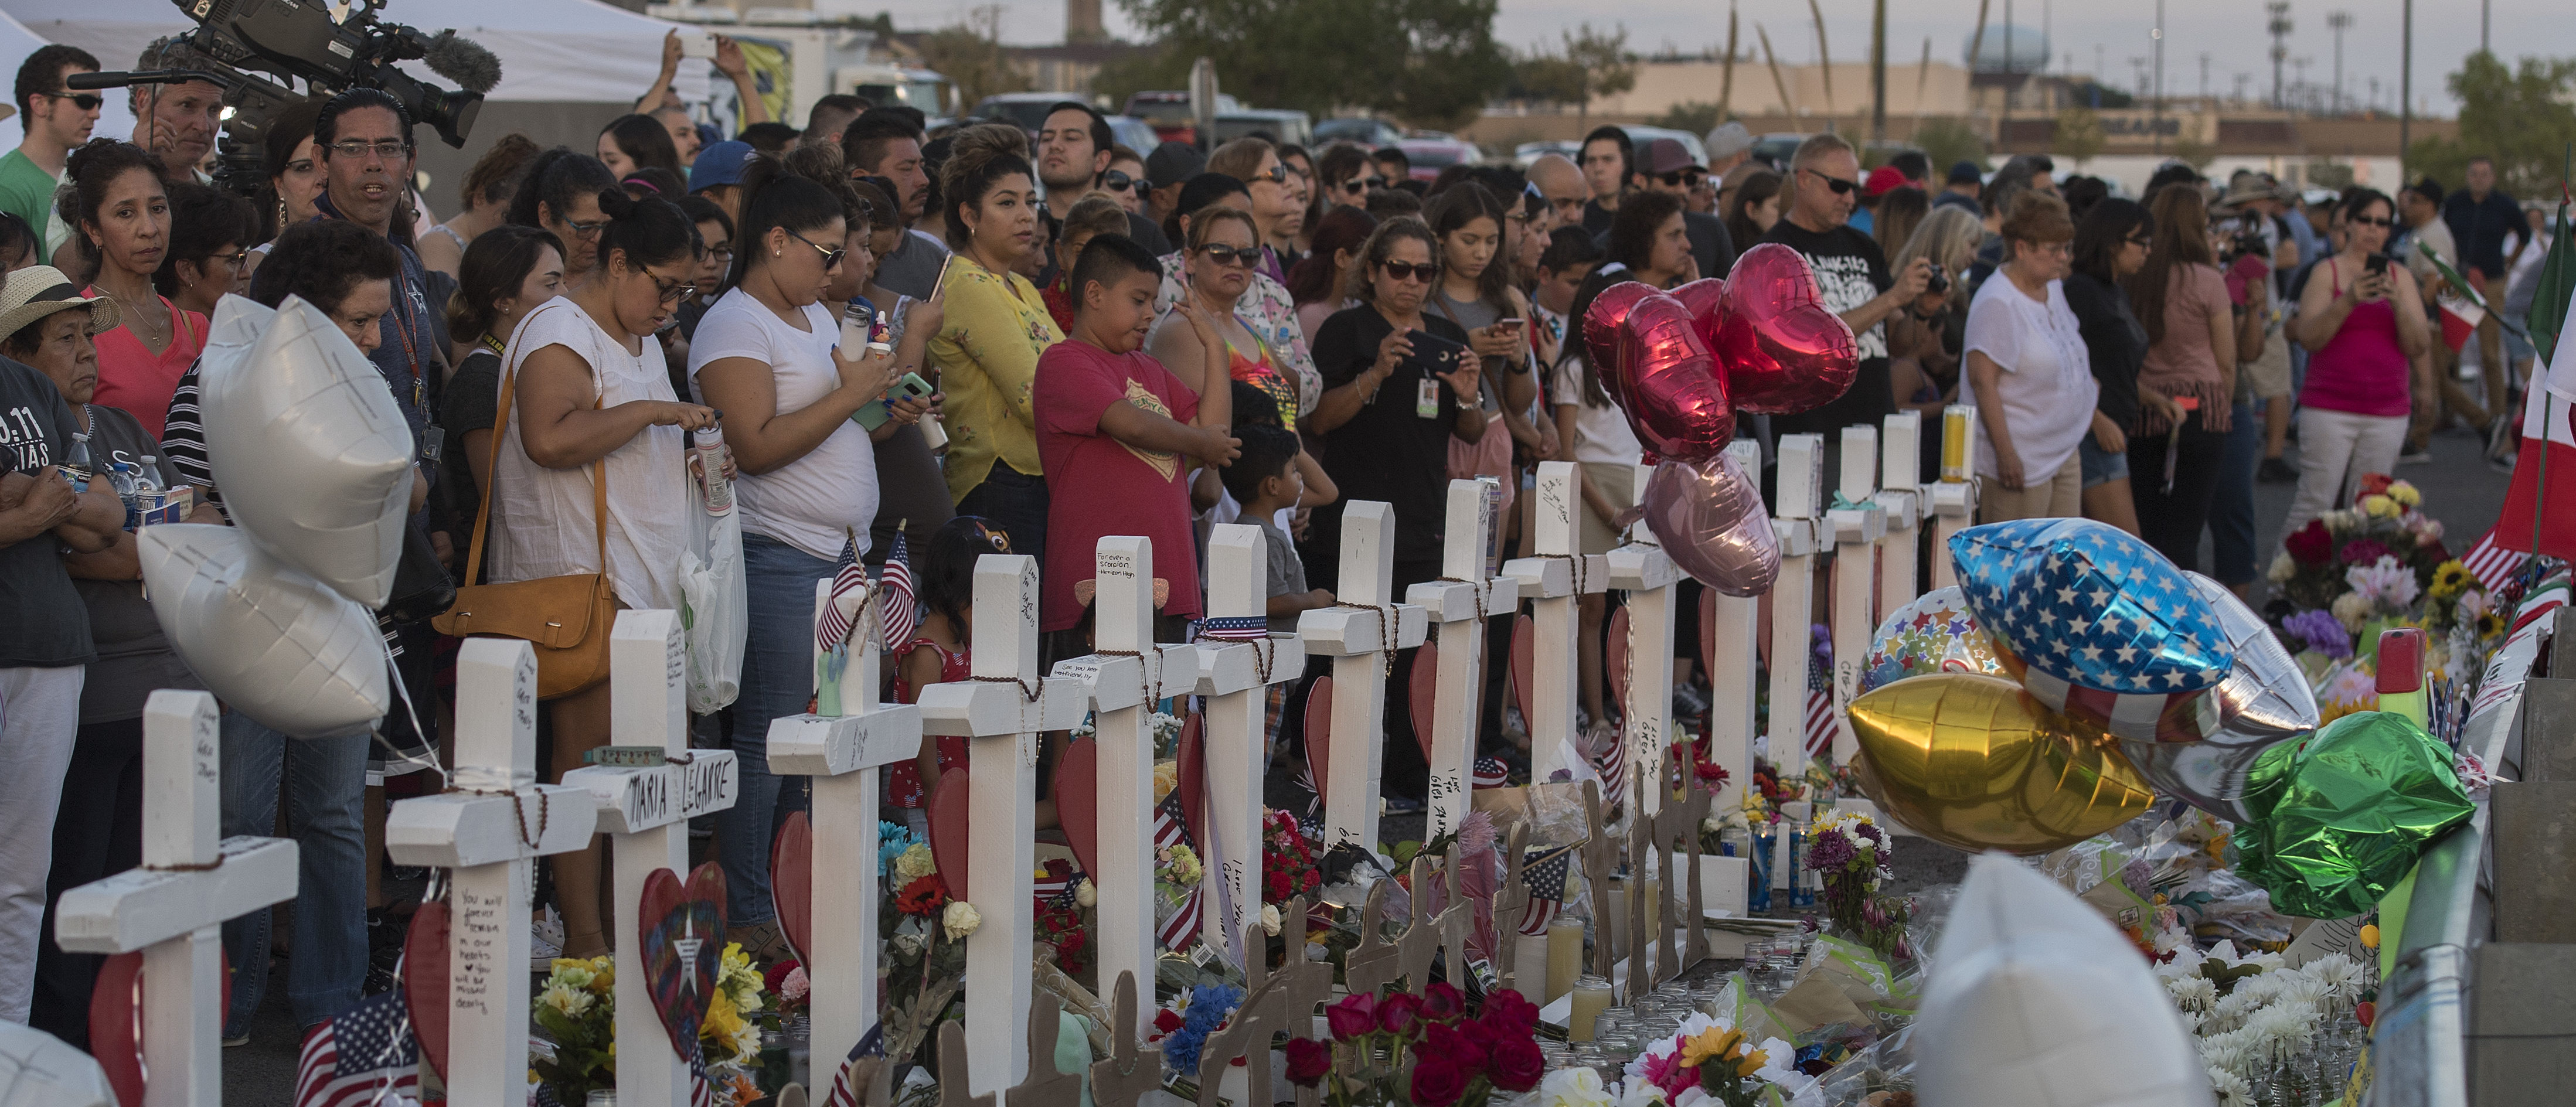 People pay their respects at a makeshift memorial for victims of Walmart shooting that left a total of 22 people dead at the Cielo Vista Mall WalMart in El Paso, Texas, on Aug. 5, 2019. (MARK RALSTON/AFP/Getty Images)